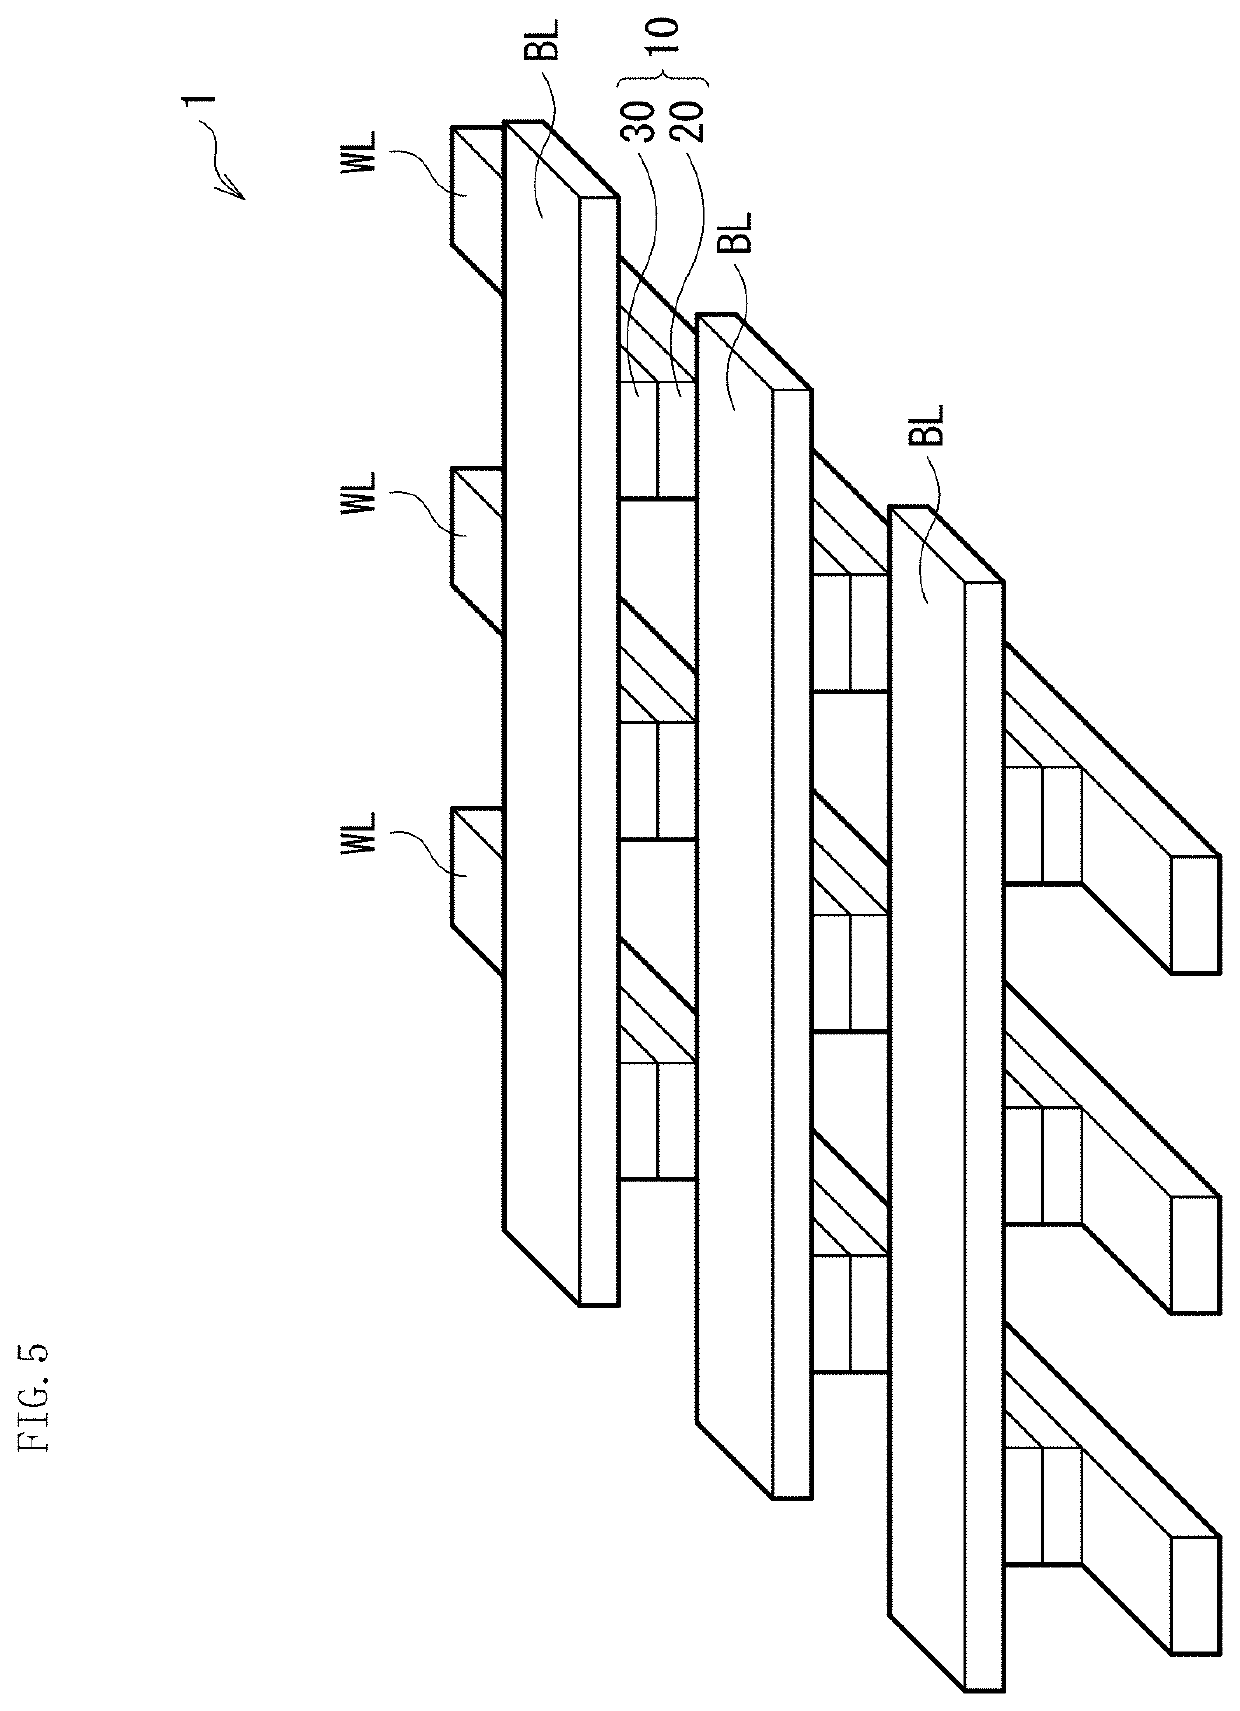 Switch device, storage apparatus, and memory system incorporating boron and carbon